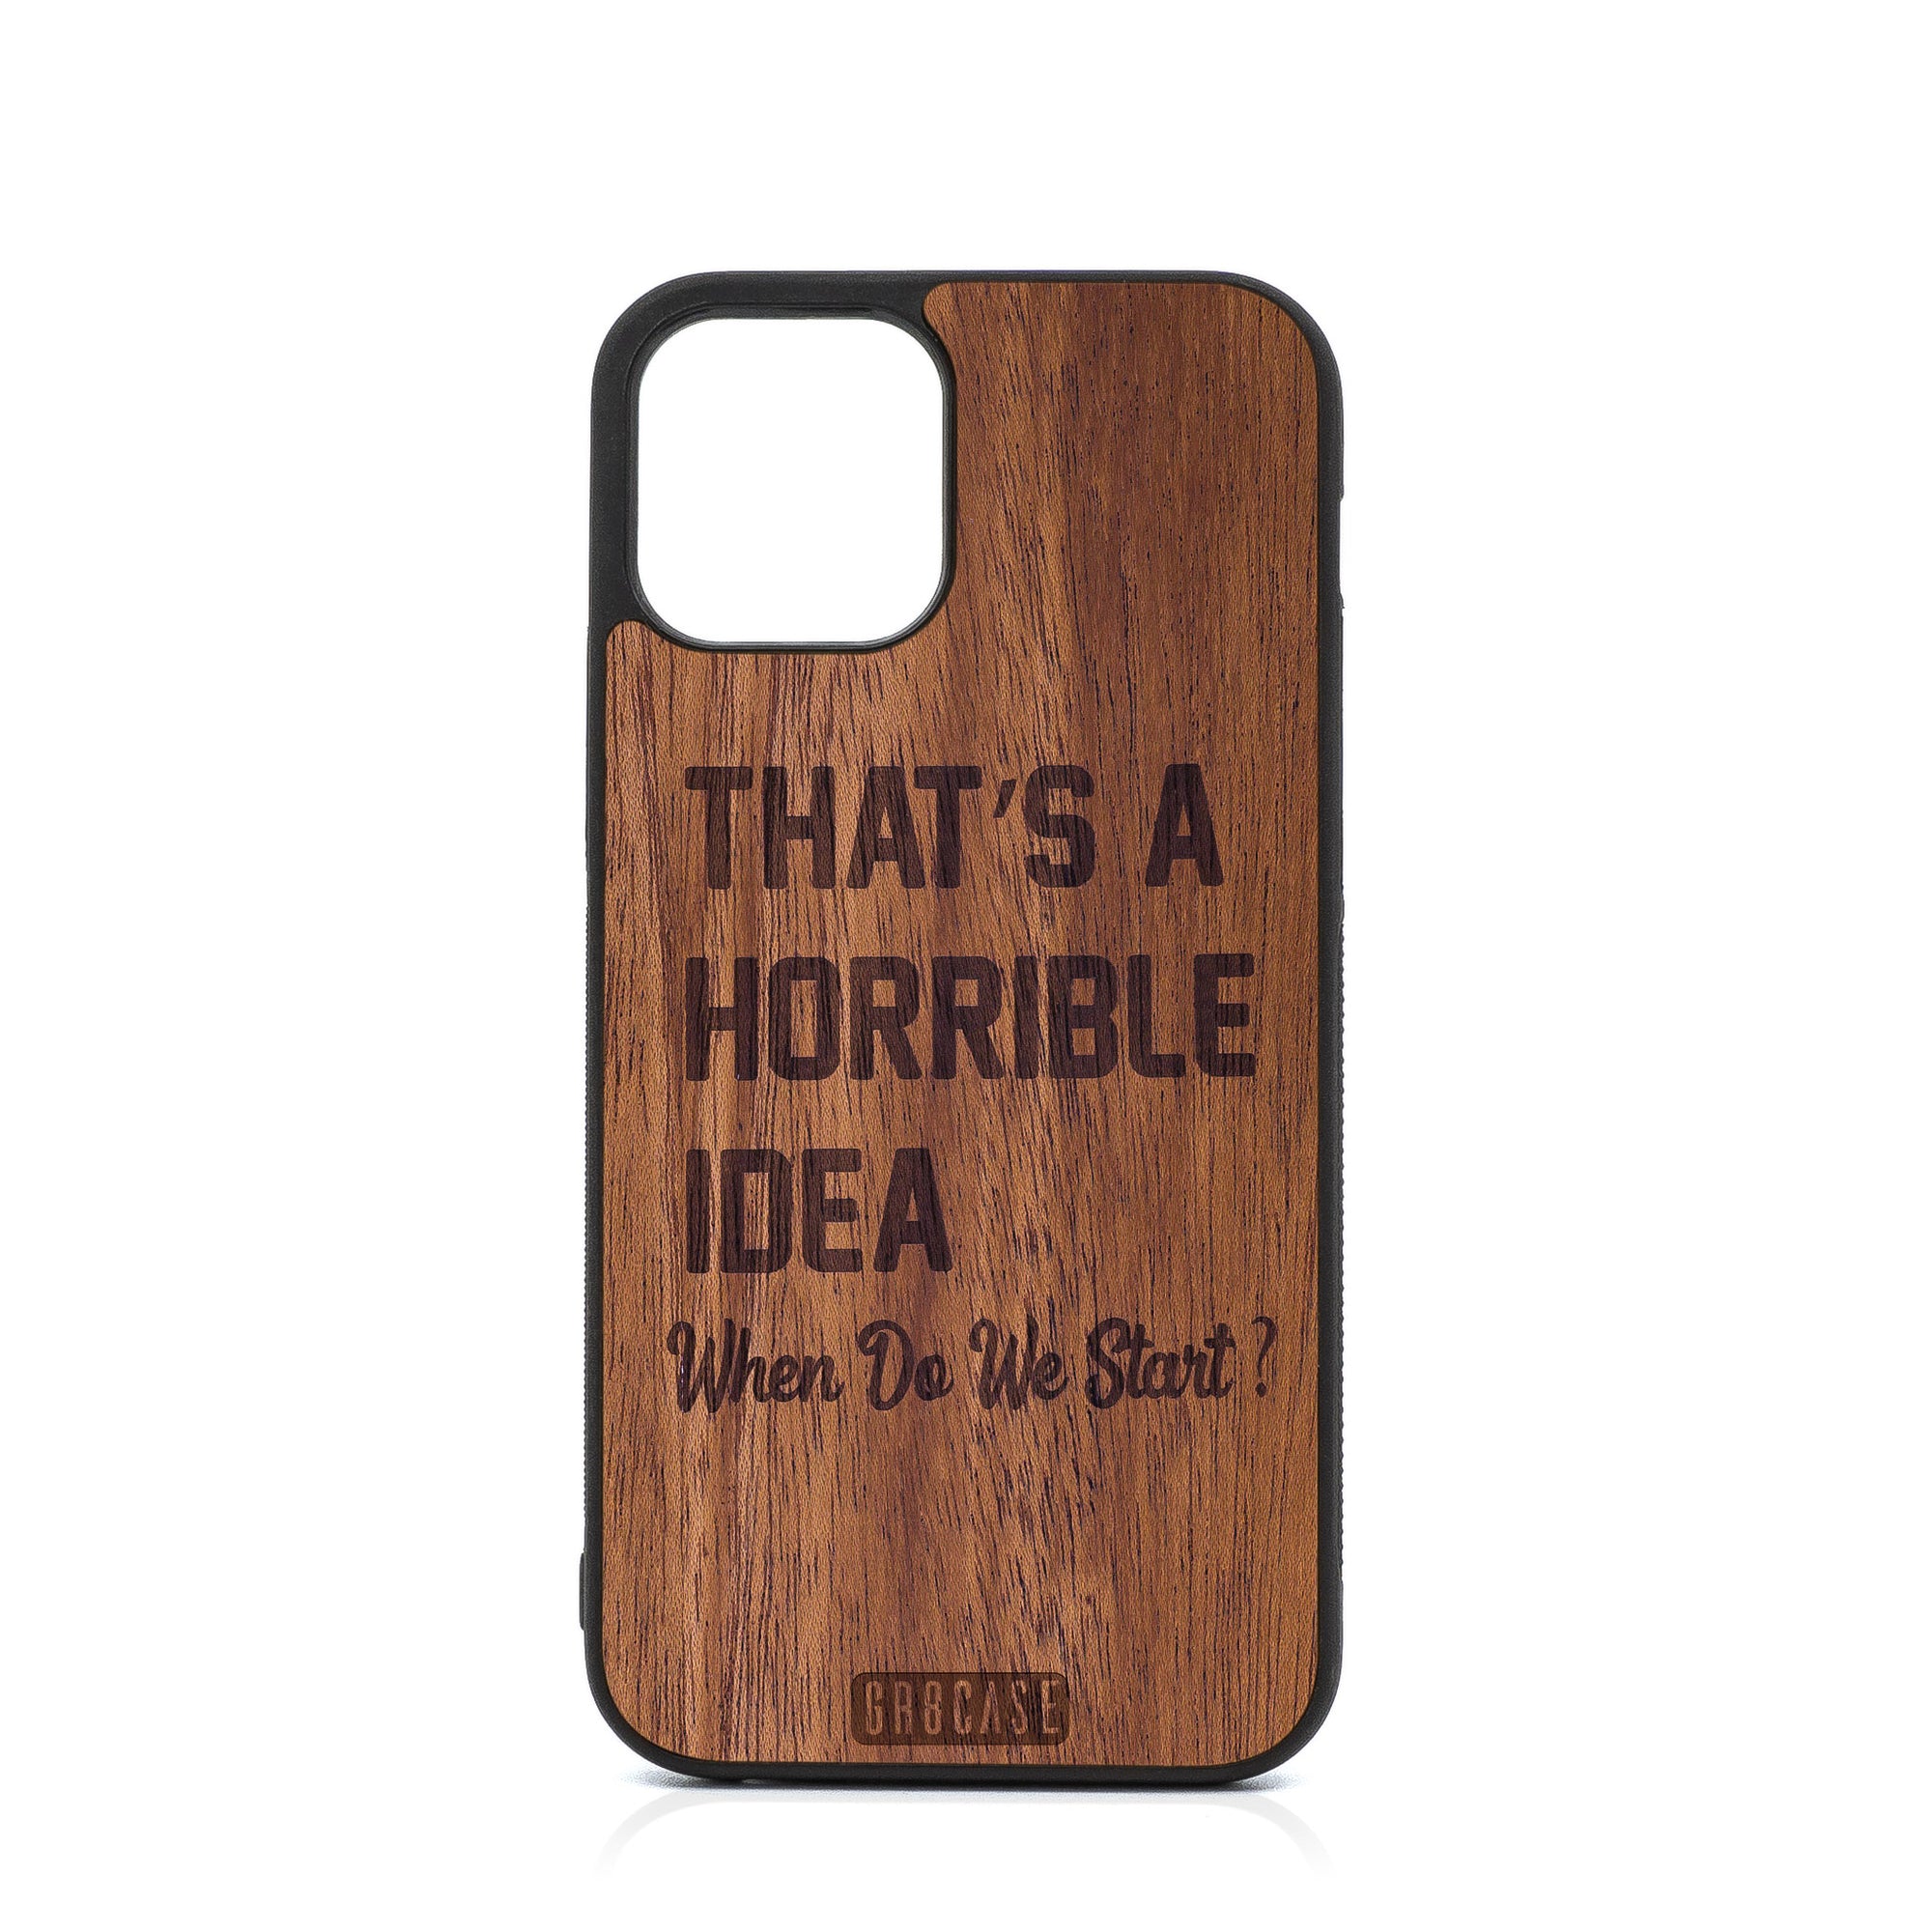 That’s A Horrible Idea When Do We Start Design Wood Case For iPhone 12 Pro